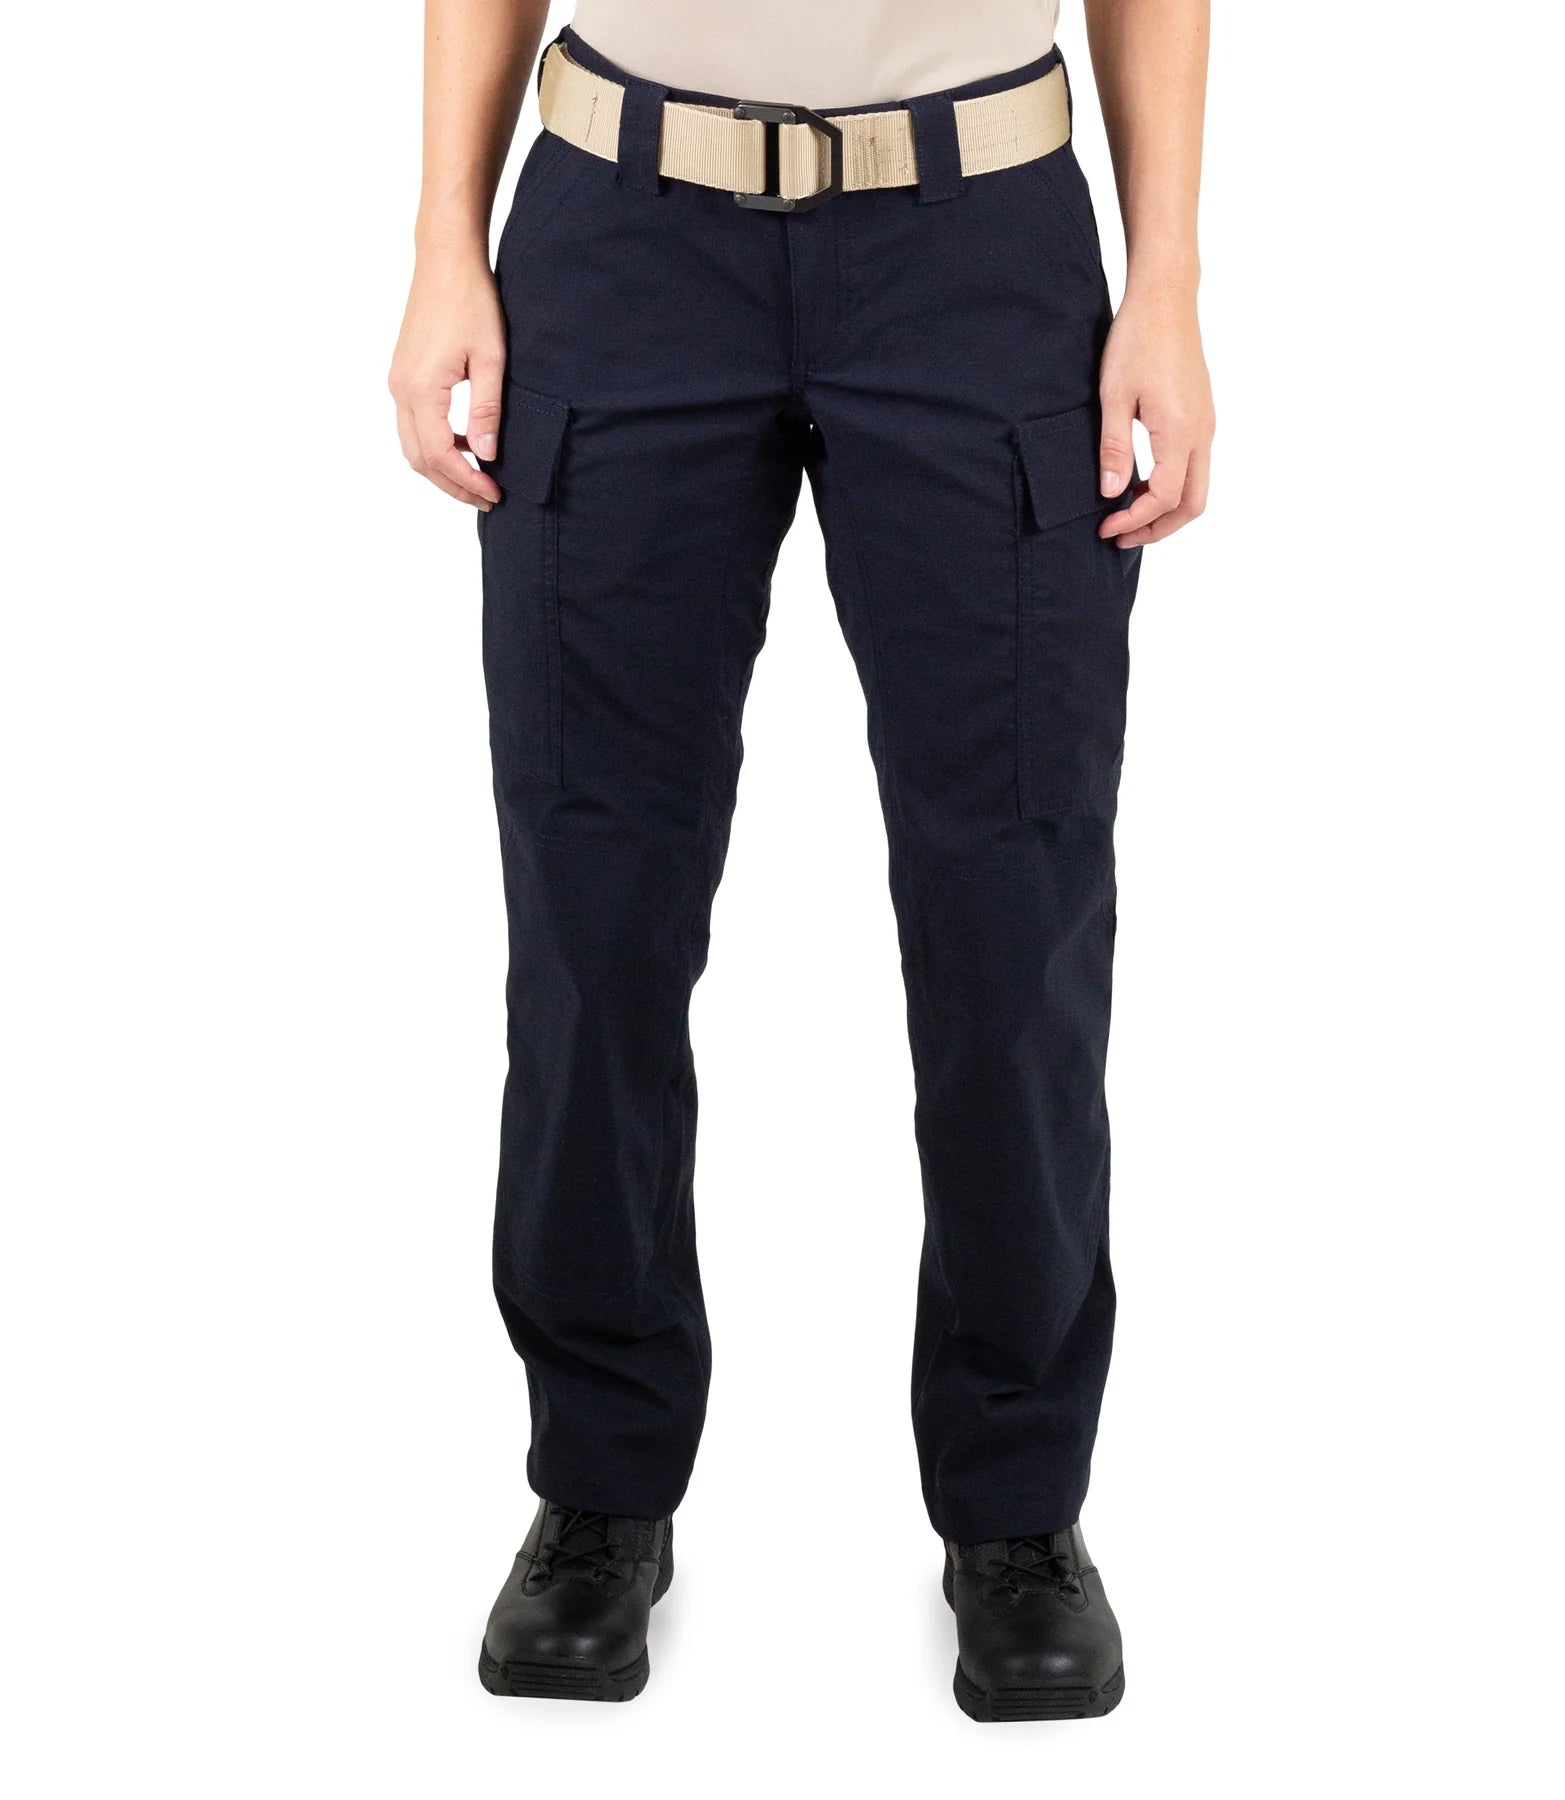 Flying Cross NFPA COMPLIANT 100% COTTON WOMENS PANTS – Western Tactical  Uniform and Gear